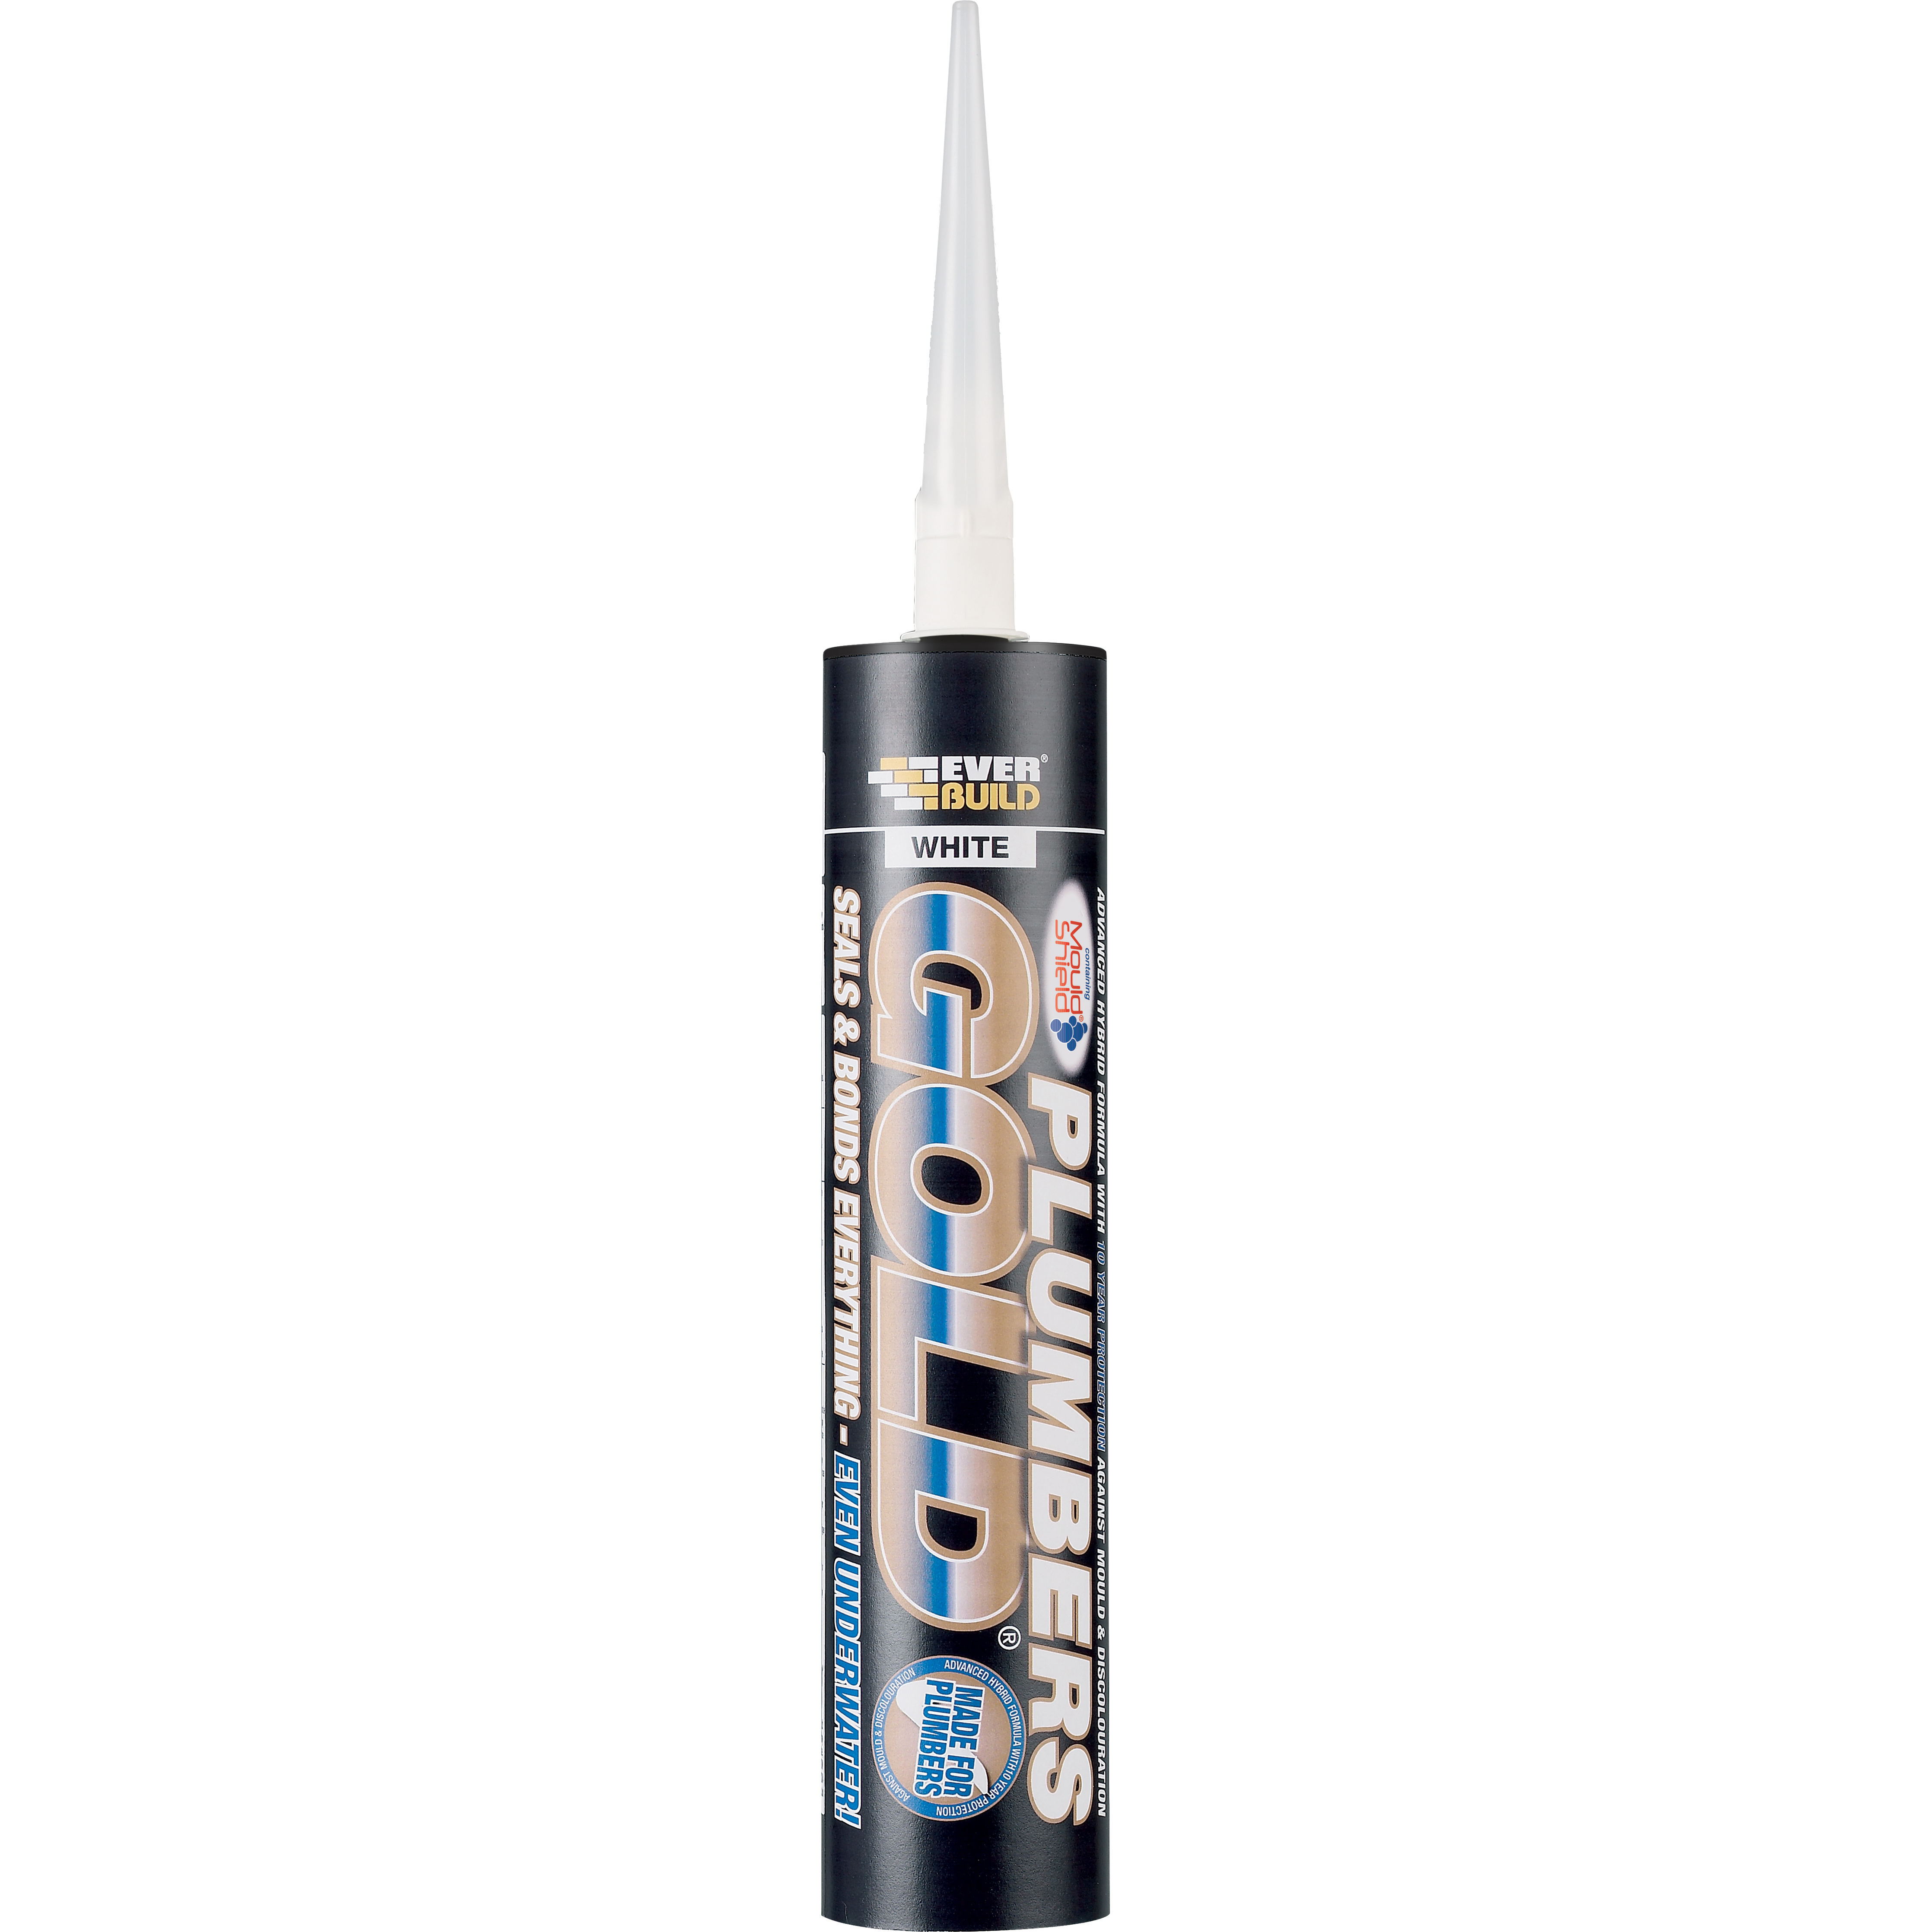 Everbuild Silicone - Plumbers Gold White 310ml